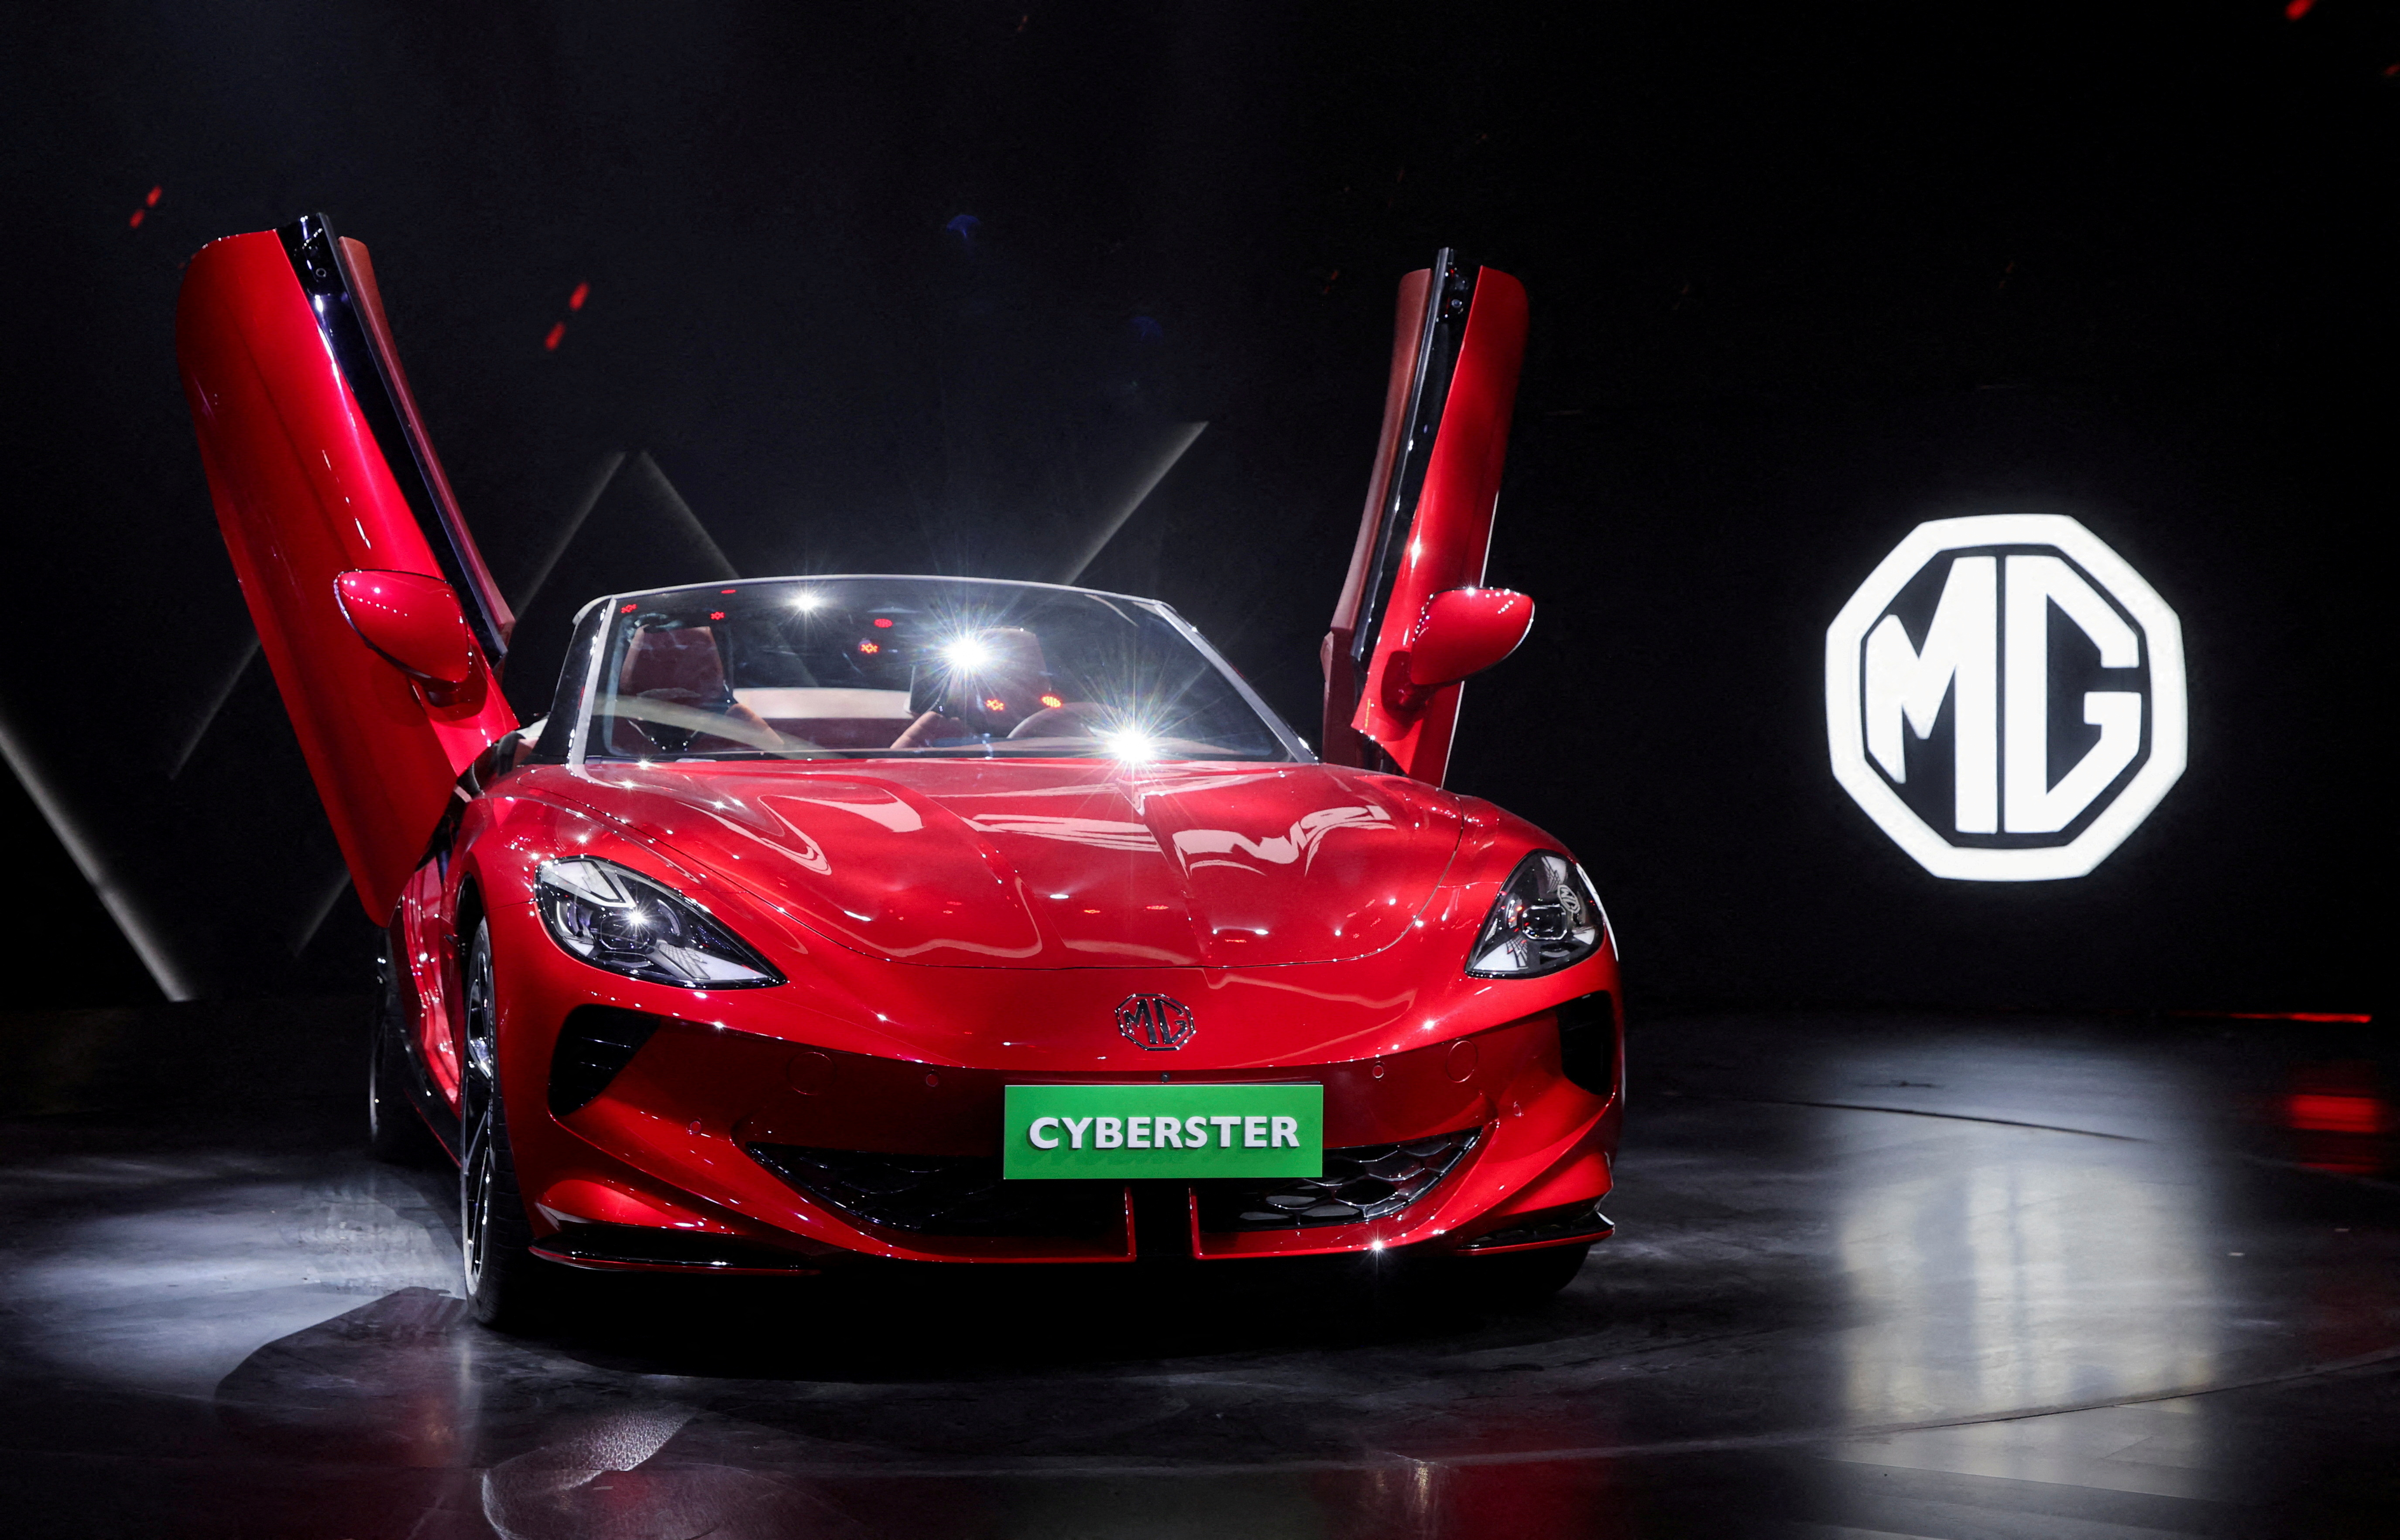 The MG Cyberster, an electric sports car is presented during its launch in Mumbai